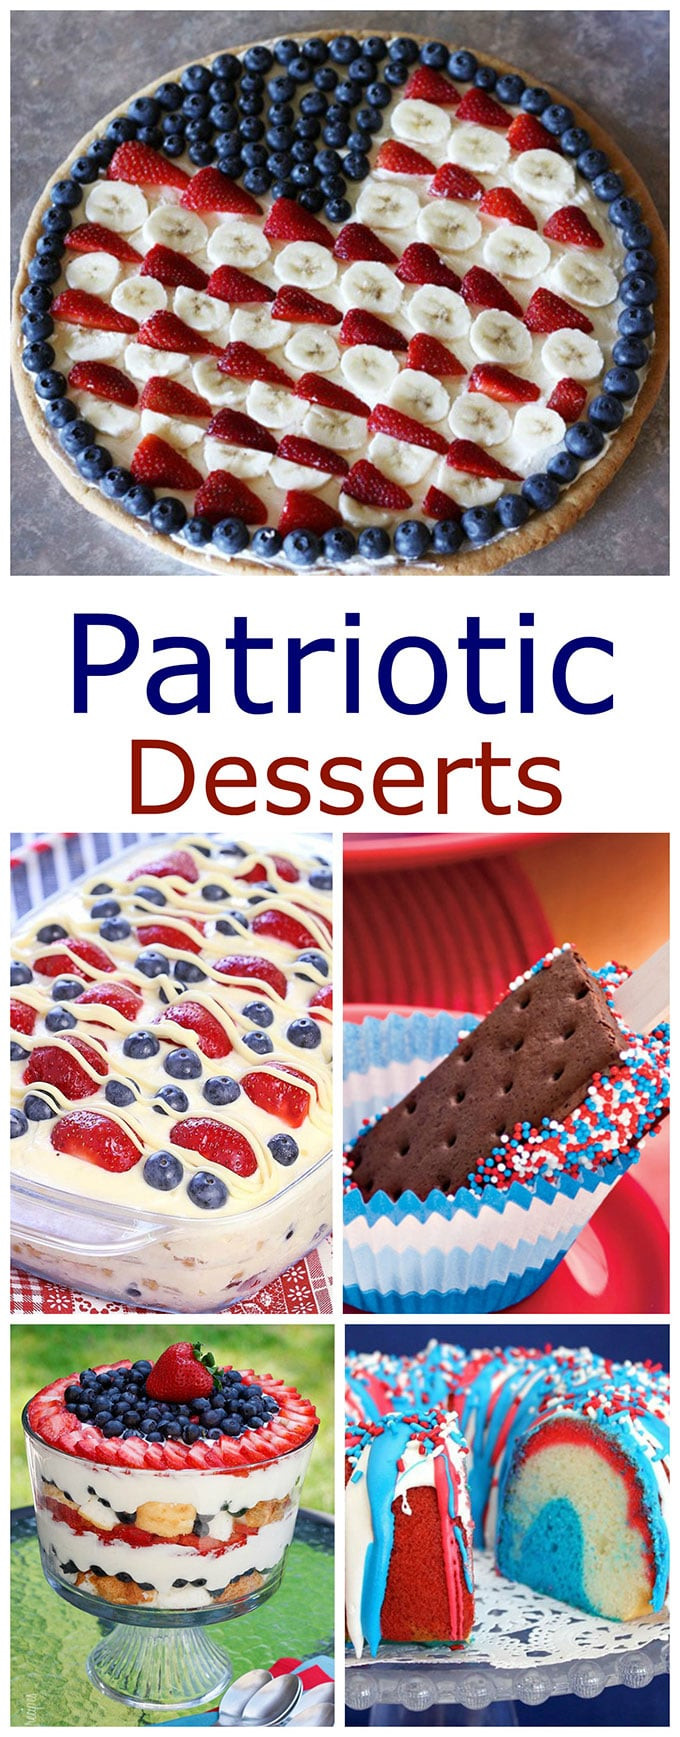 Quick And Easy Fourth Of July Desserts
 Quick And Easy 4th of July Desserts House of Hawthornes